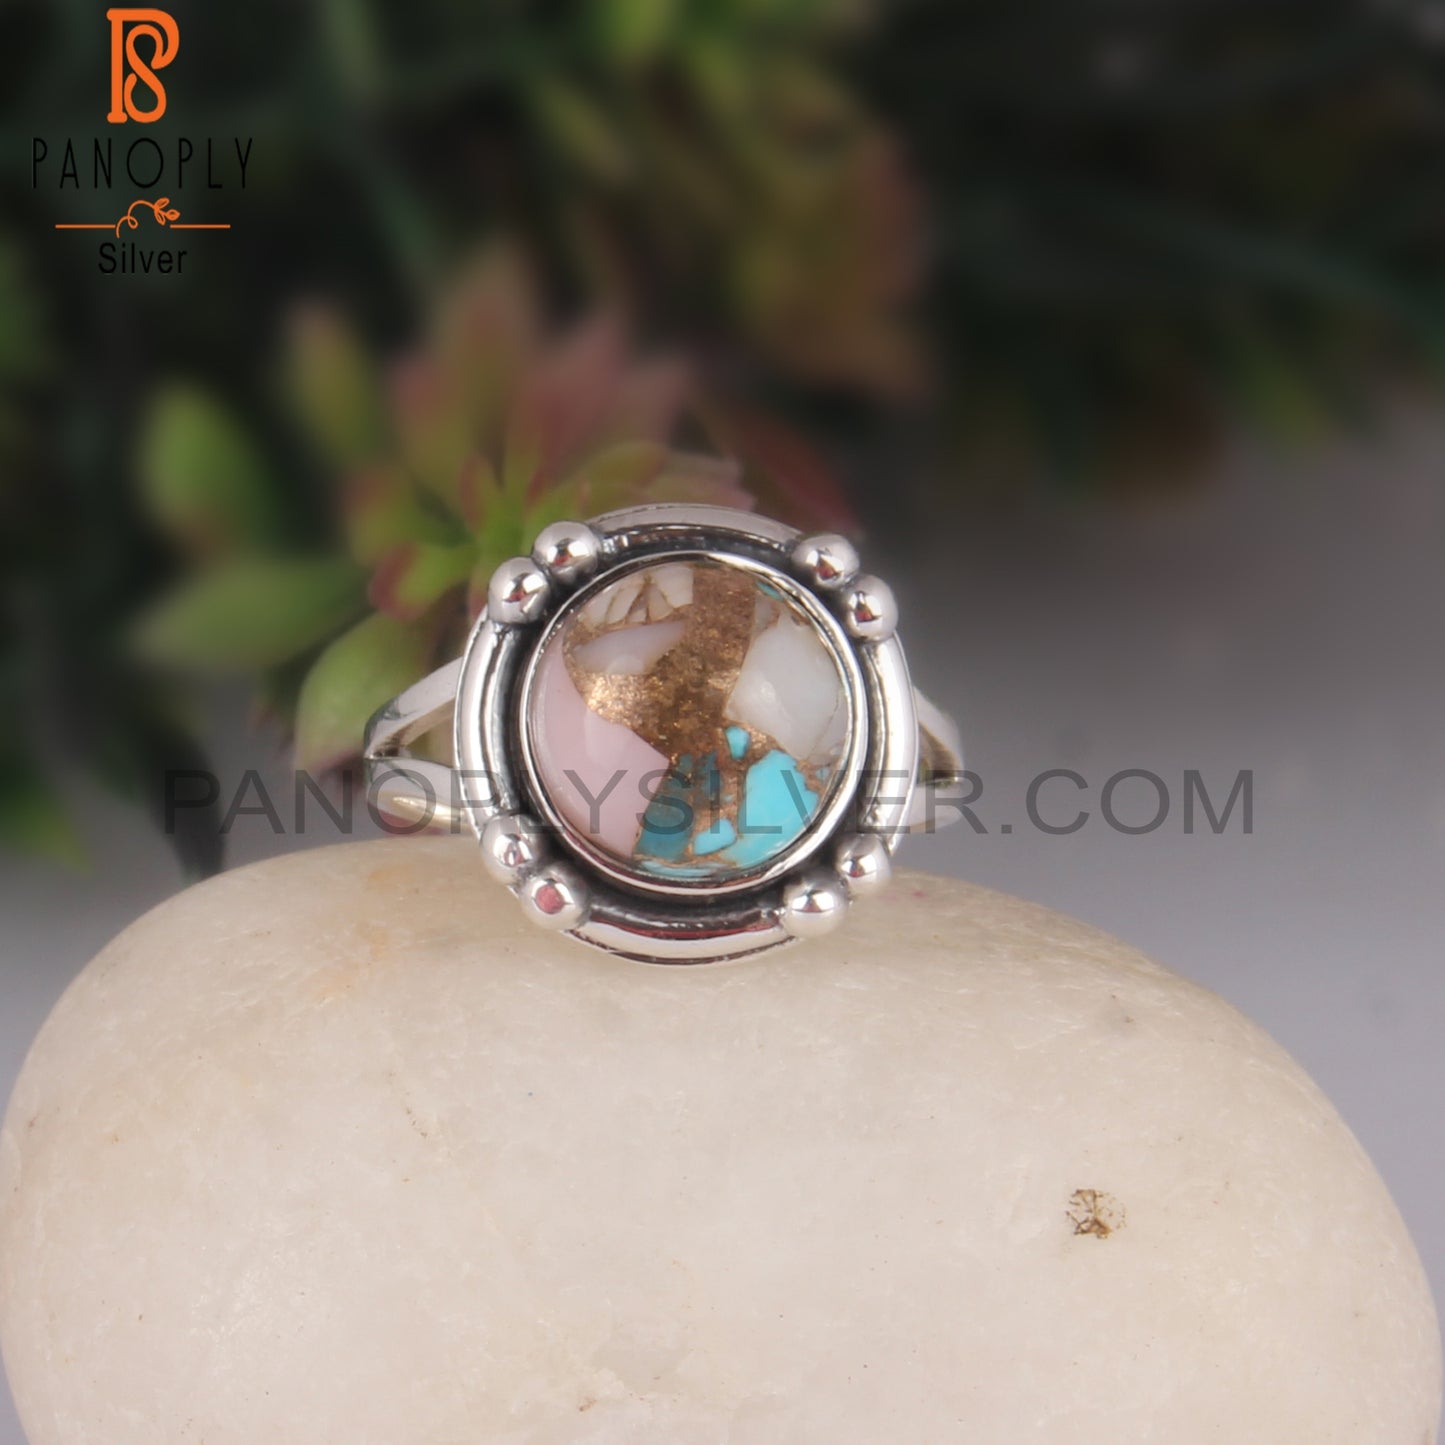 Mojave Bumblebee Turquoise Stone Round Silver Ring